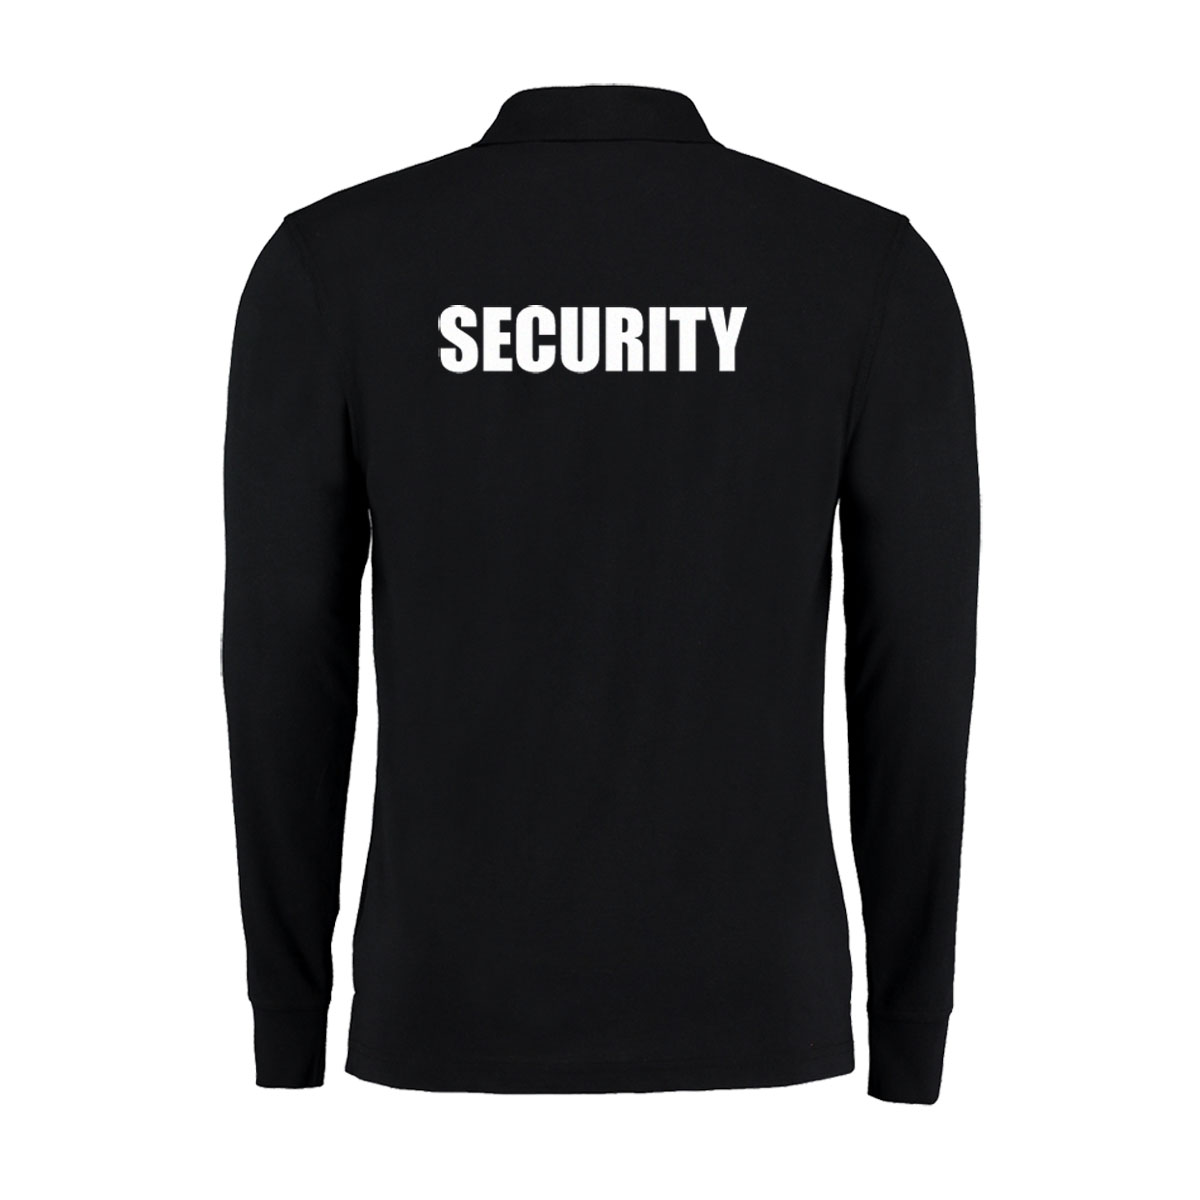 ‘SECURITY’ Front/Back Embroidered & Printed Long Sleeve Polo Shirt ...